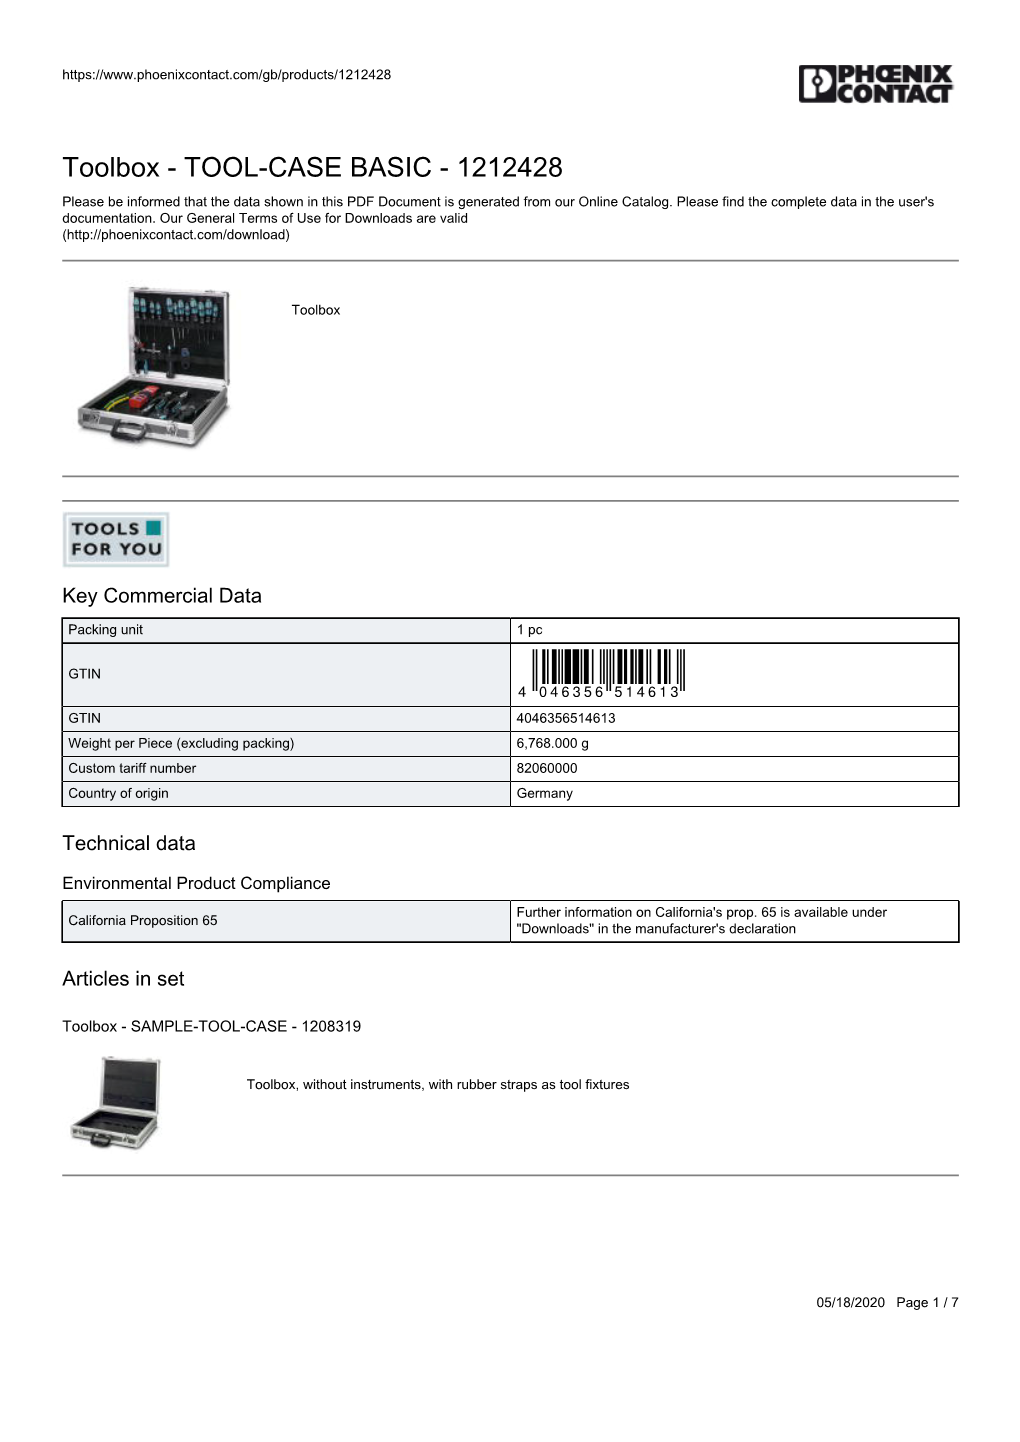 Toolbox - TOOL-CASE BASIC - 1212428 Please Be Informed That the Data Shown in This PDF Document Is Generated from Our Online Catalog